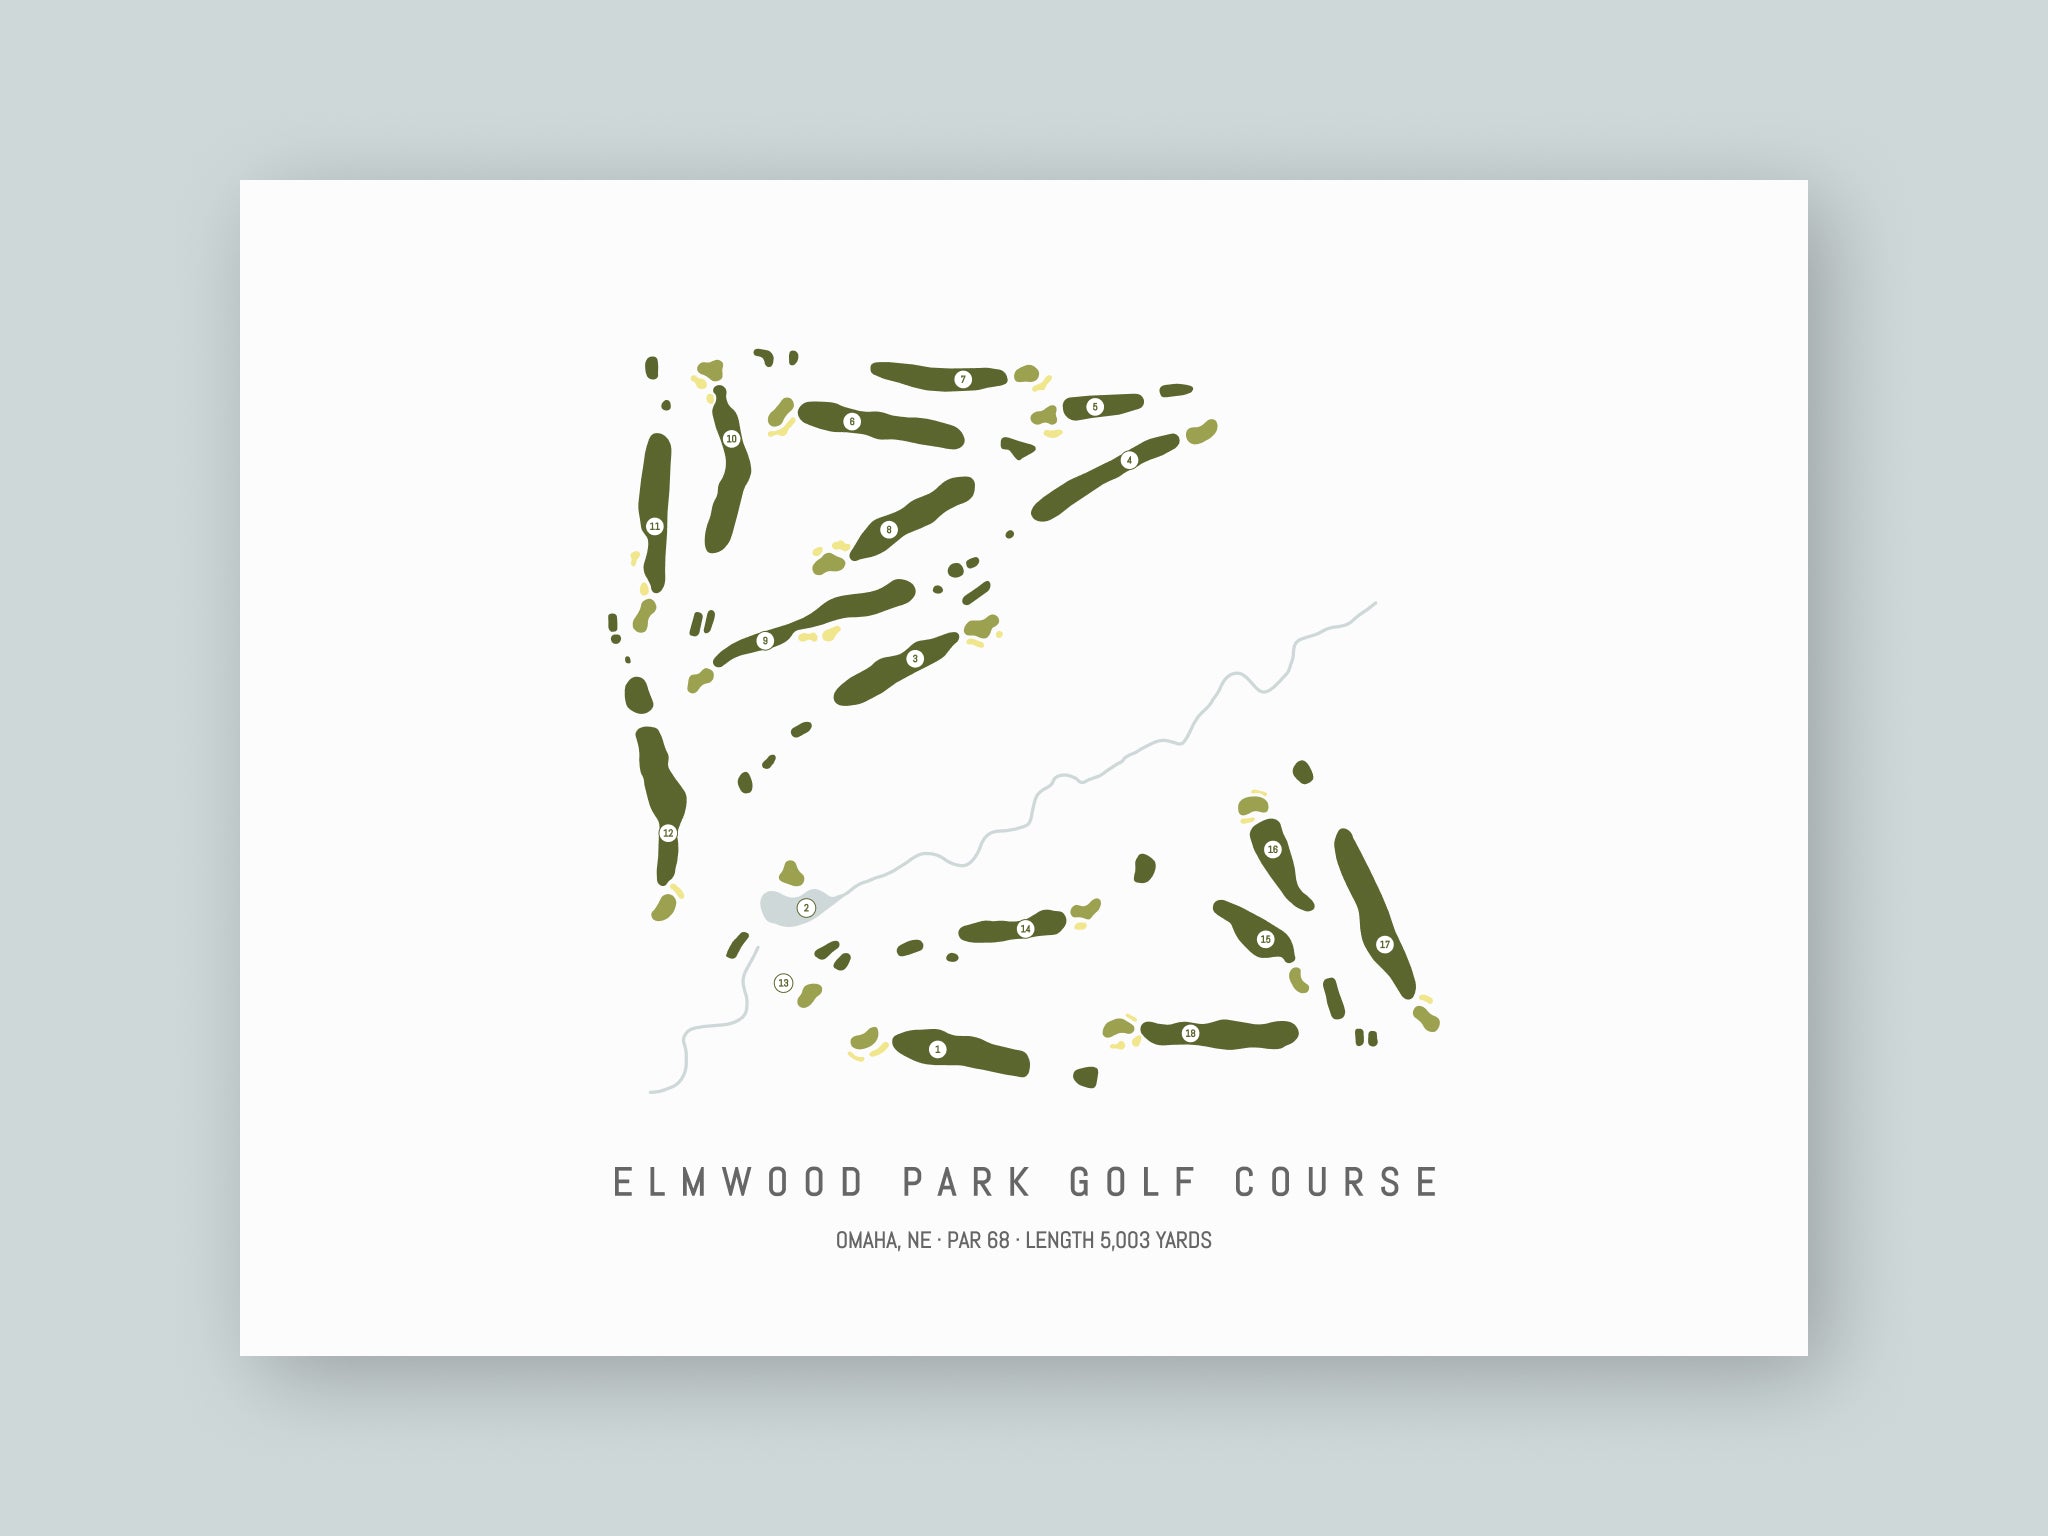 Elmwood-Park-Golf-Course-NE--Unframed-24x18-With-Hole-Numbers